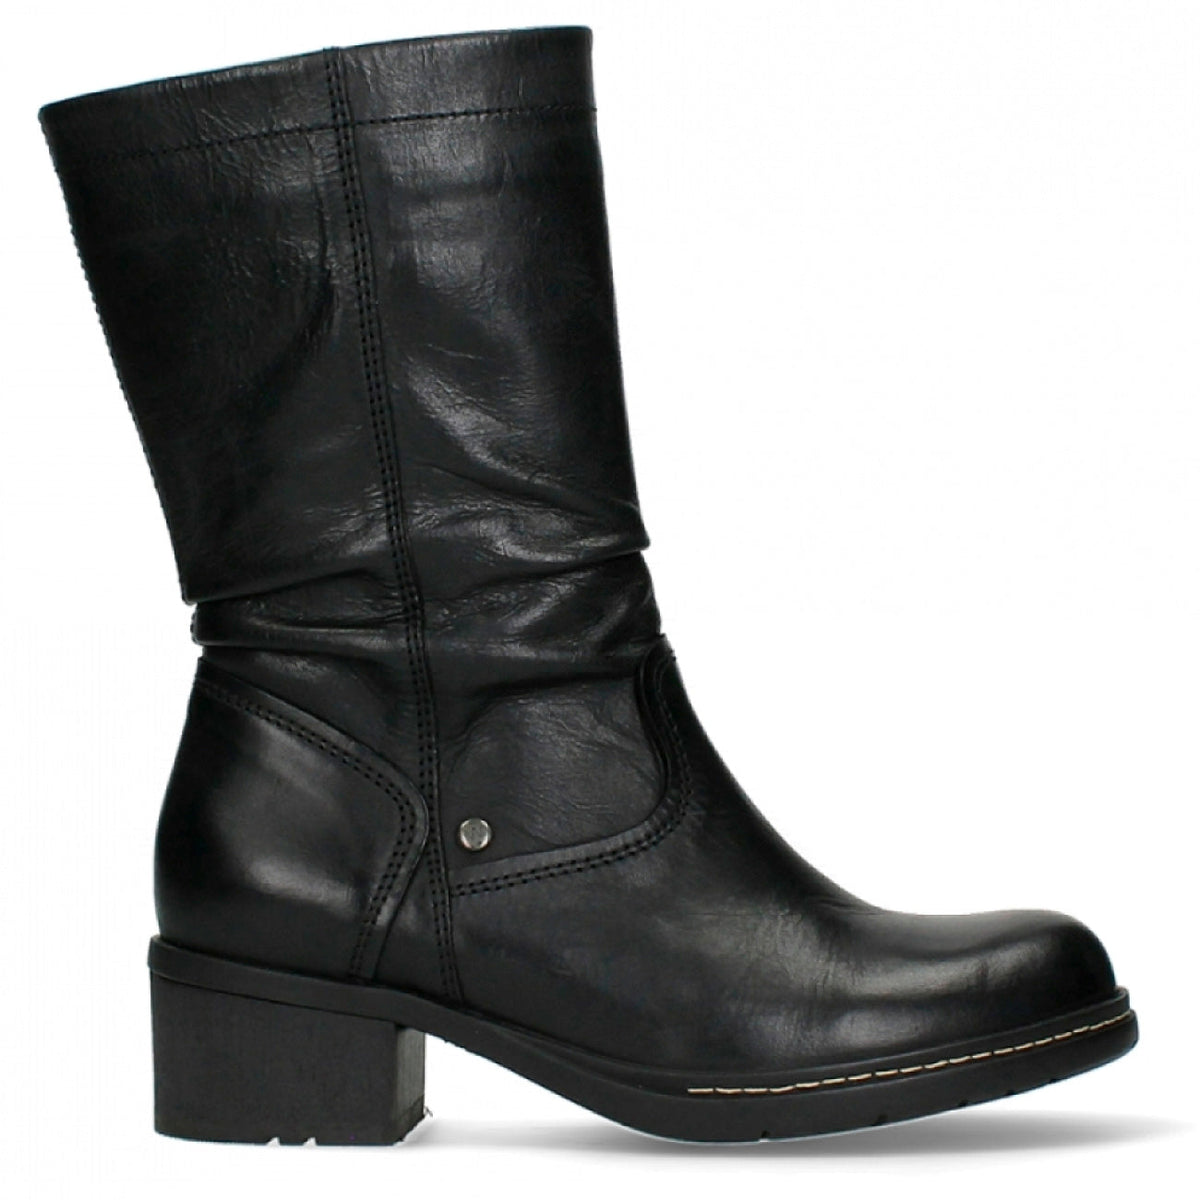 Wolky, Edmonton, Boots, Soft Wax Leather, Black Boots Wolky 